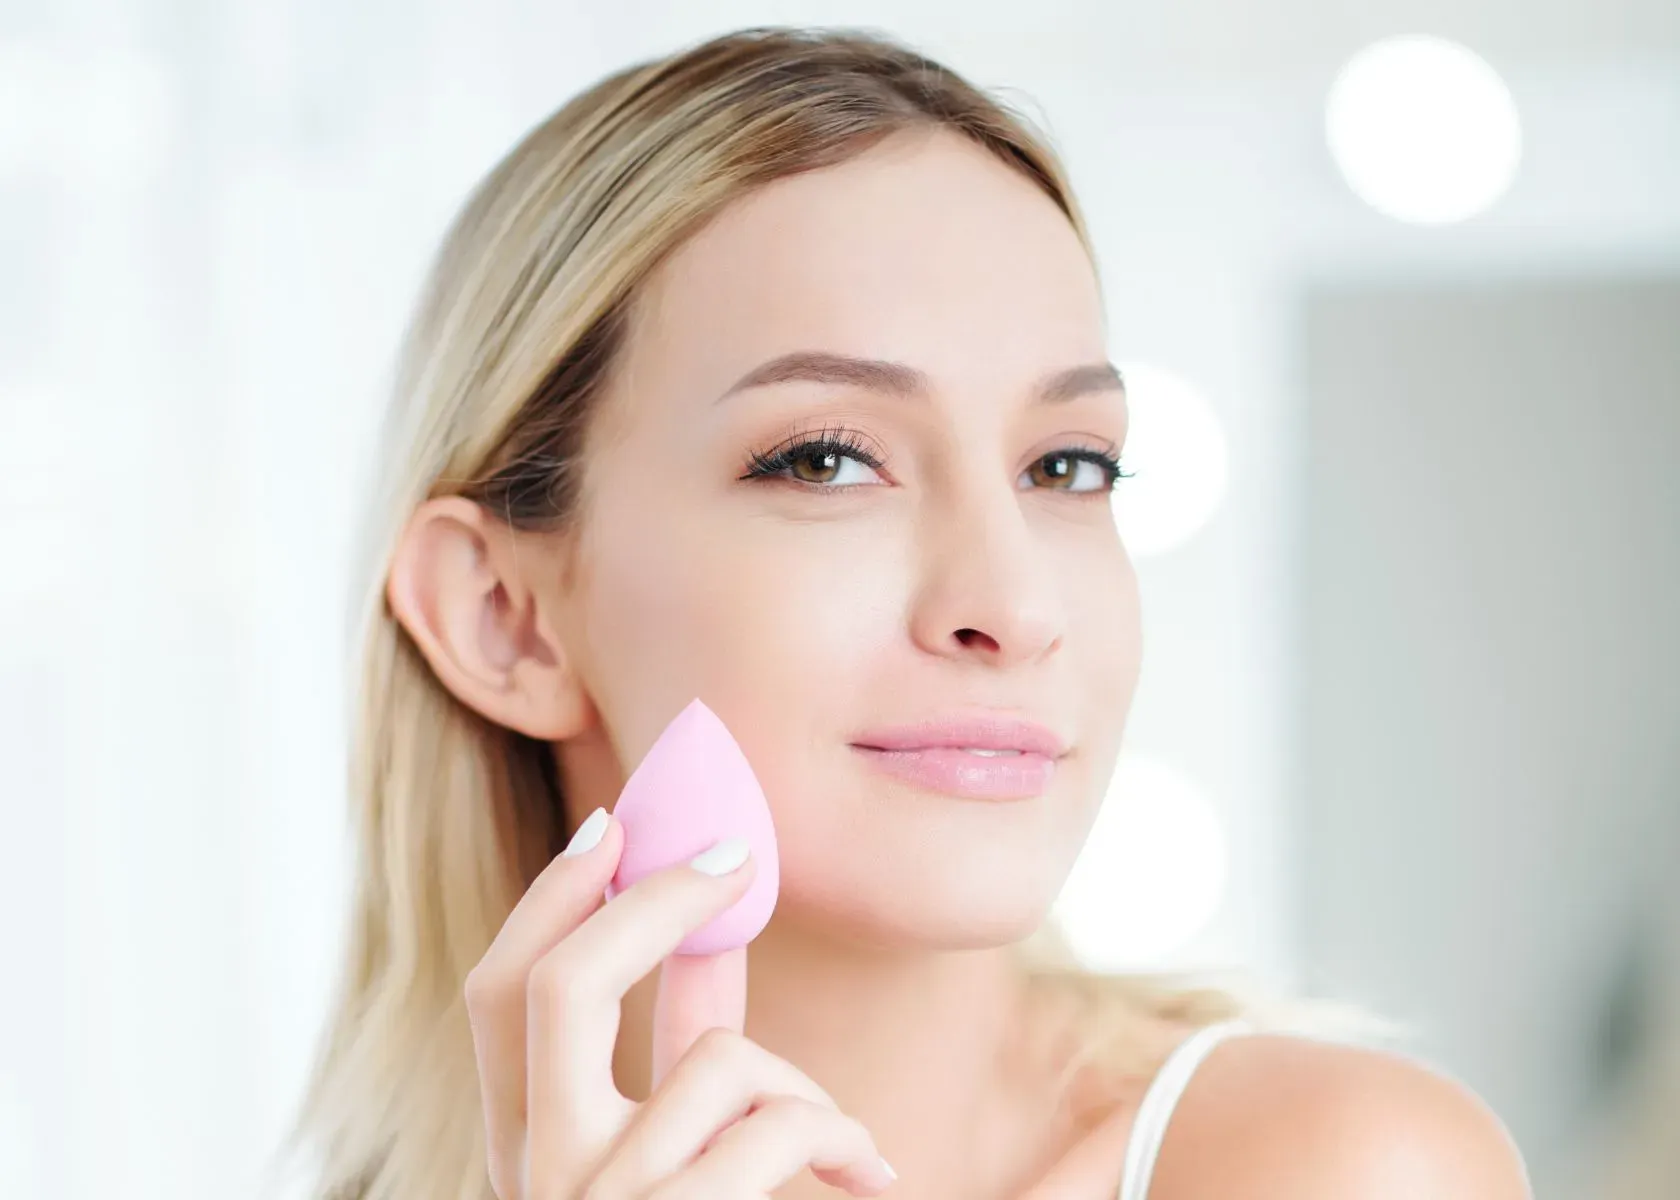 Finding the Best Blush Shade for Fair Skin